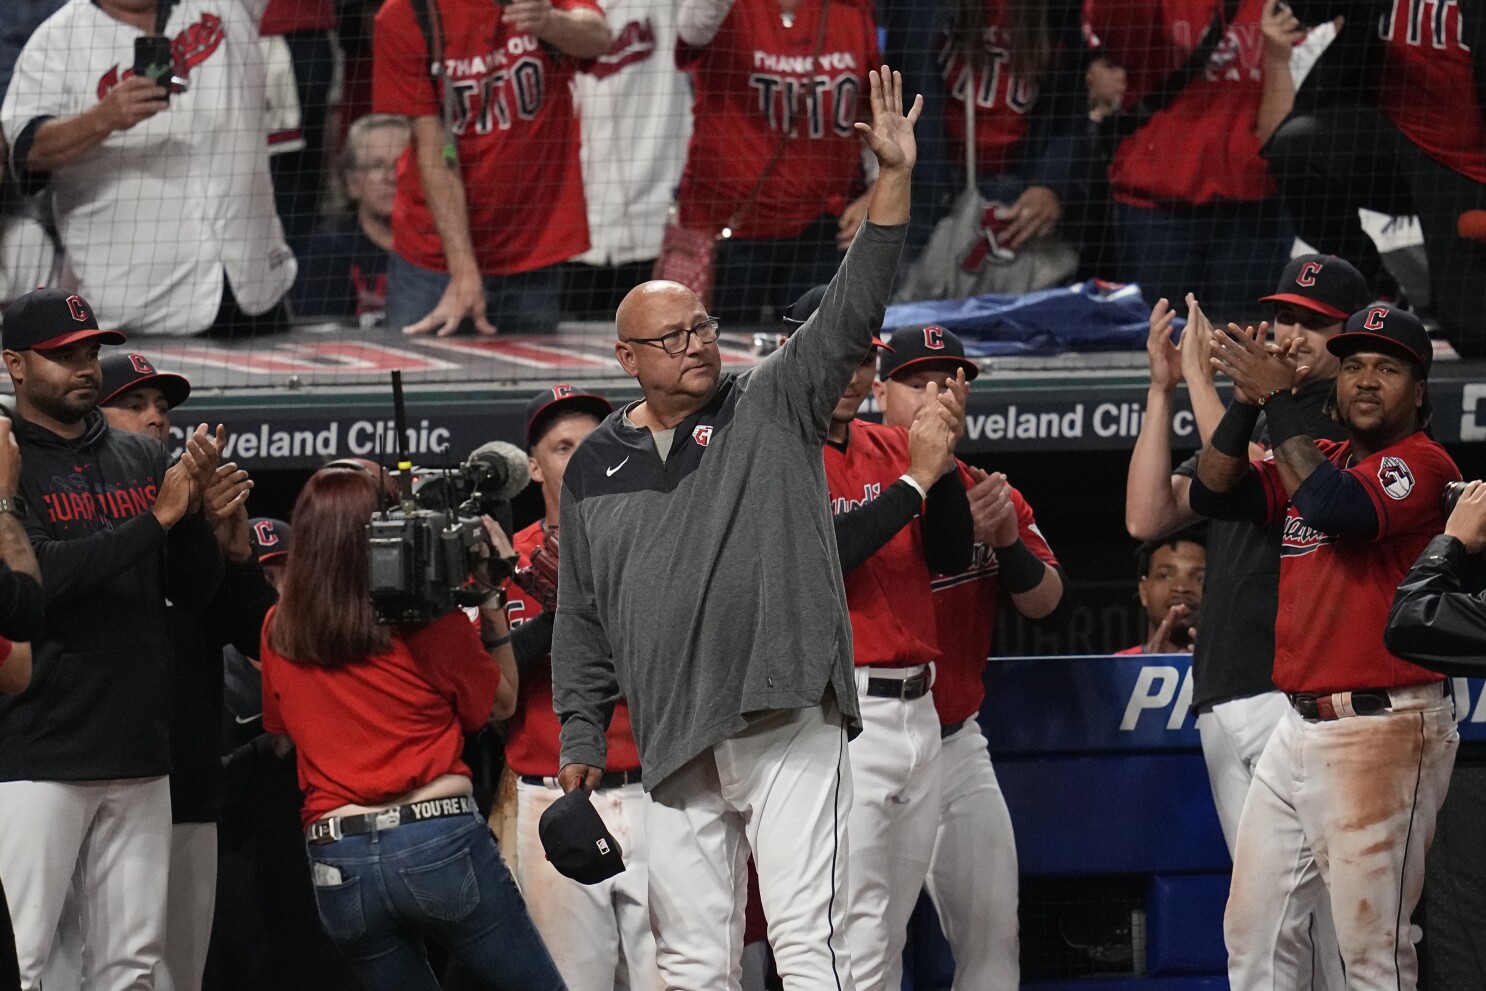 Guardians manager Terry Francona hints that this could be his final season